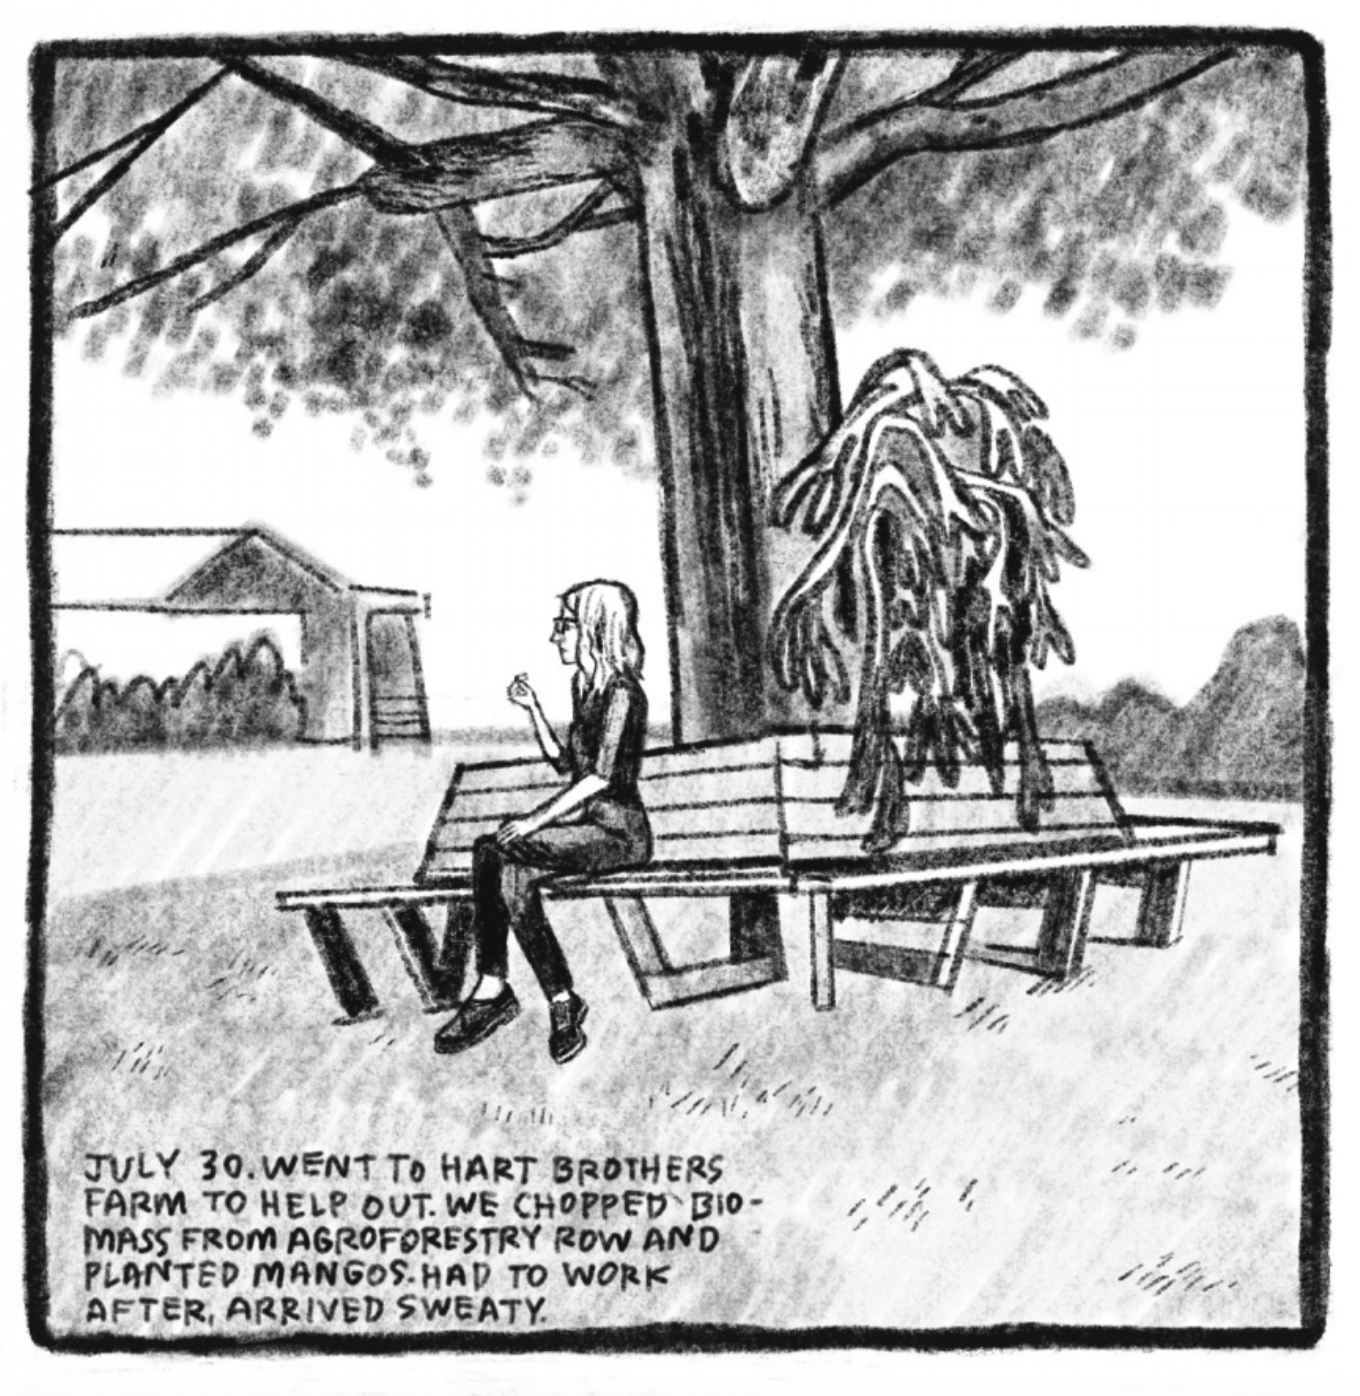 4. Kim sits on one side of a corner bench outside on a field of grass. The bench surrounds a tree with a large trunk; its leaves and branches overhead make it a shady area to sit. Next to the tree is a large mass of vines or moss hanging over the other side of the bench, to Kimâ€™s right. She looks towards her left off into the distance. In the background is a bush-lined building to the left and more bushes or trees to the right. â€œJuly 30. Went to Hart Brothers Farm to help out. We chopped biomass from Agroforestry Row and planted mangos. Had to work after. Arrived sweaty.â€